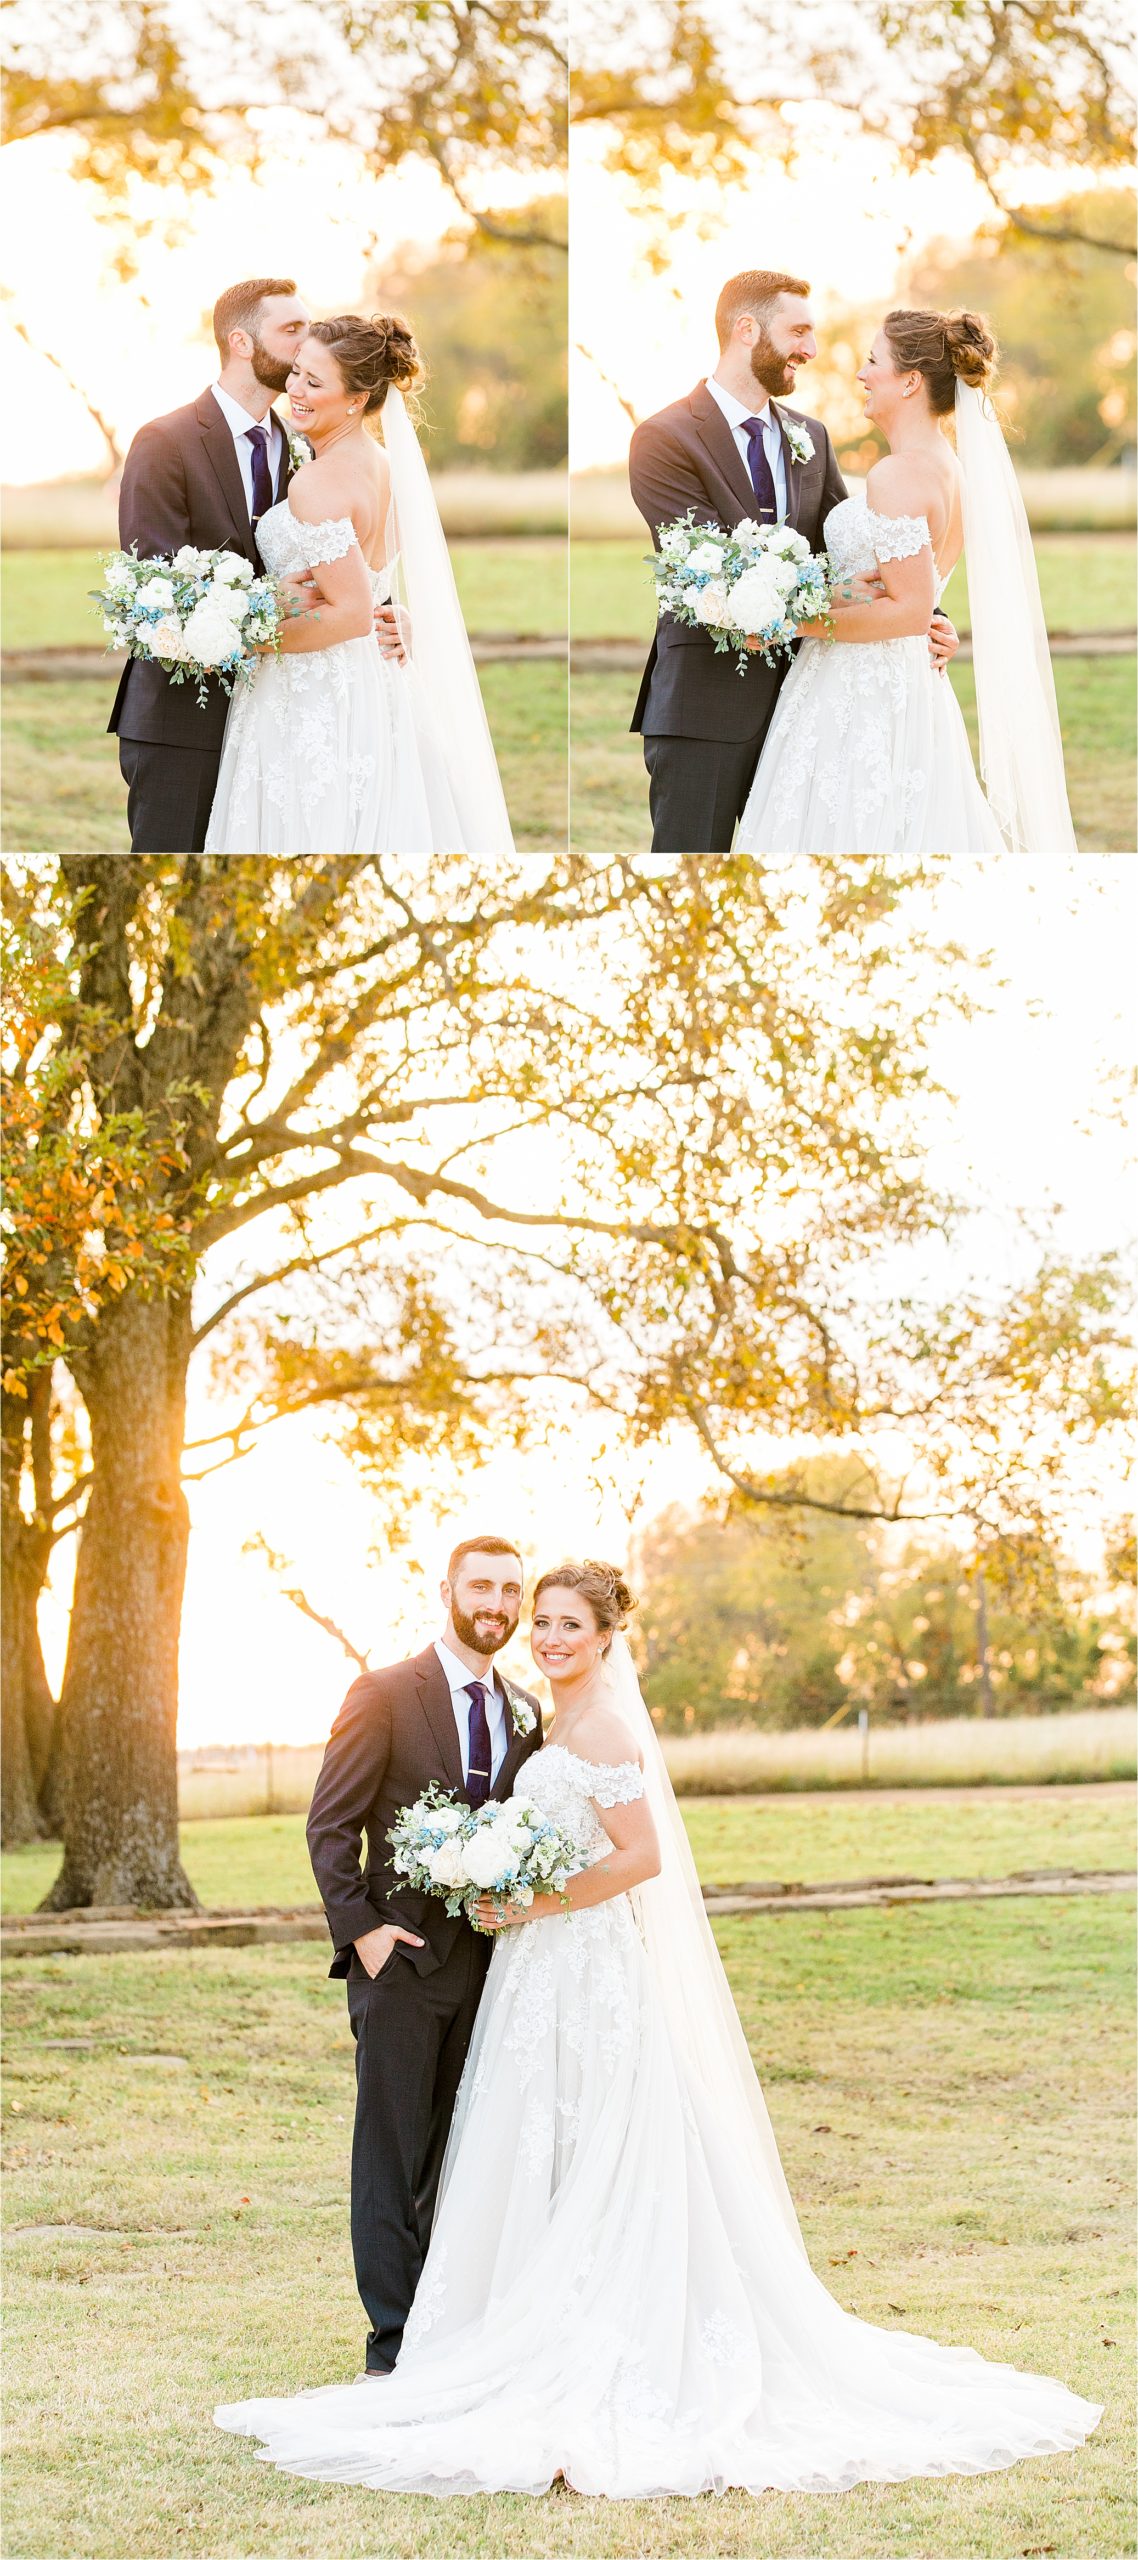 A couple laughs together and embraces for a classic wedding portrait during their sunset newlywed photos at Rustic Grace Estate with McKinney Wedding Photographer Jillian Hogan